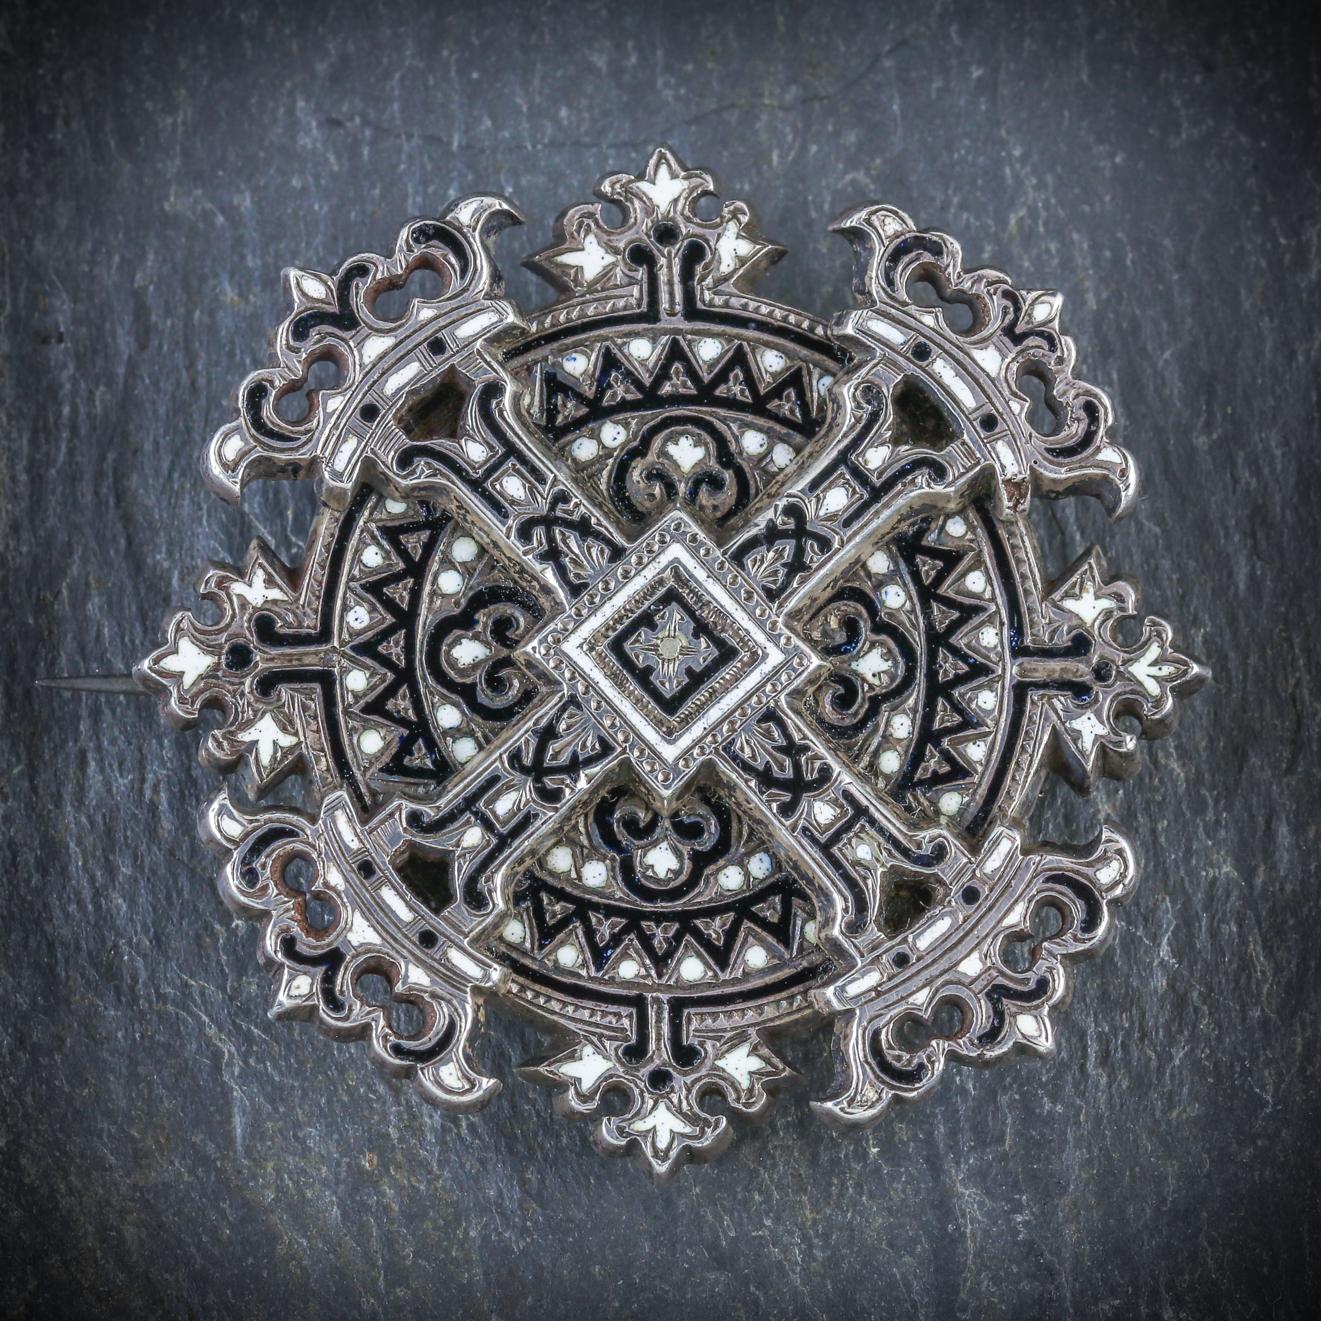 This unique Silver cross brooch is Georgian, Circa 1800

The brooch displays beautiful black and white enamel detailing with a large cross in the centre topped with four beautiful crowns

The brooch is set in Silver and fitted with a secure pin and